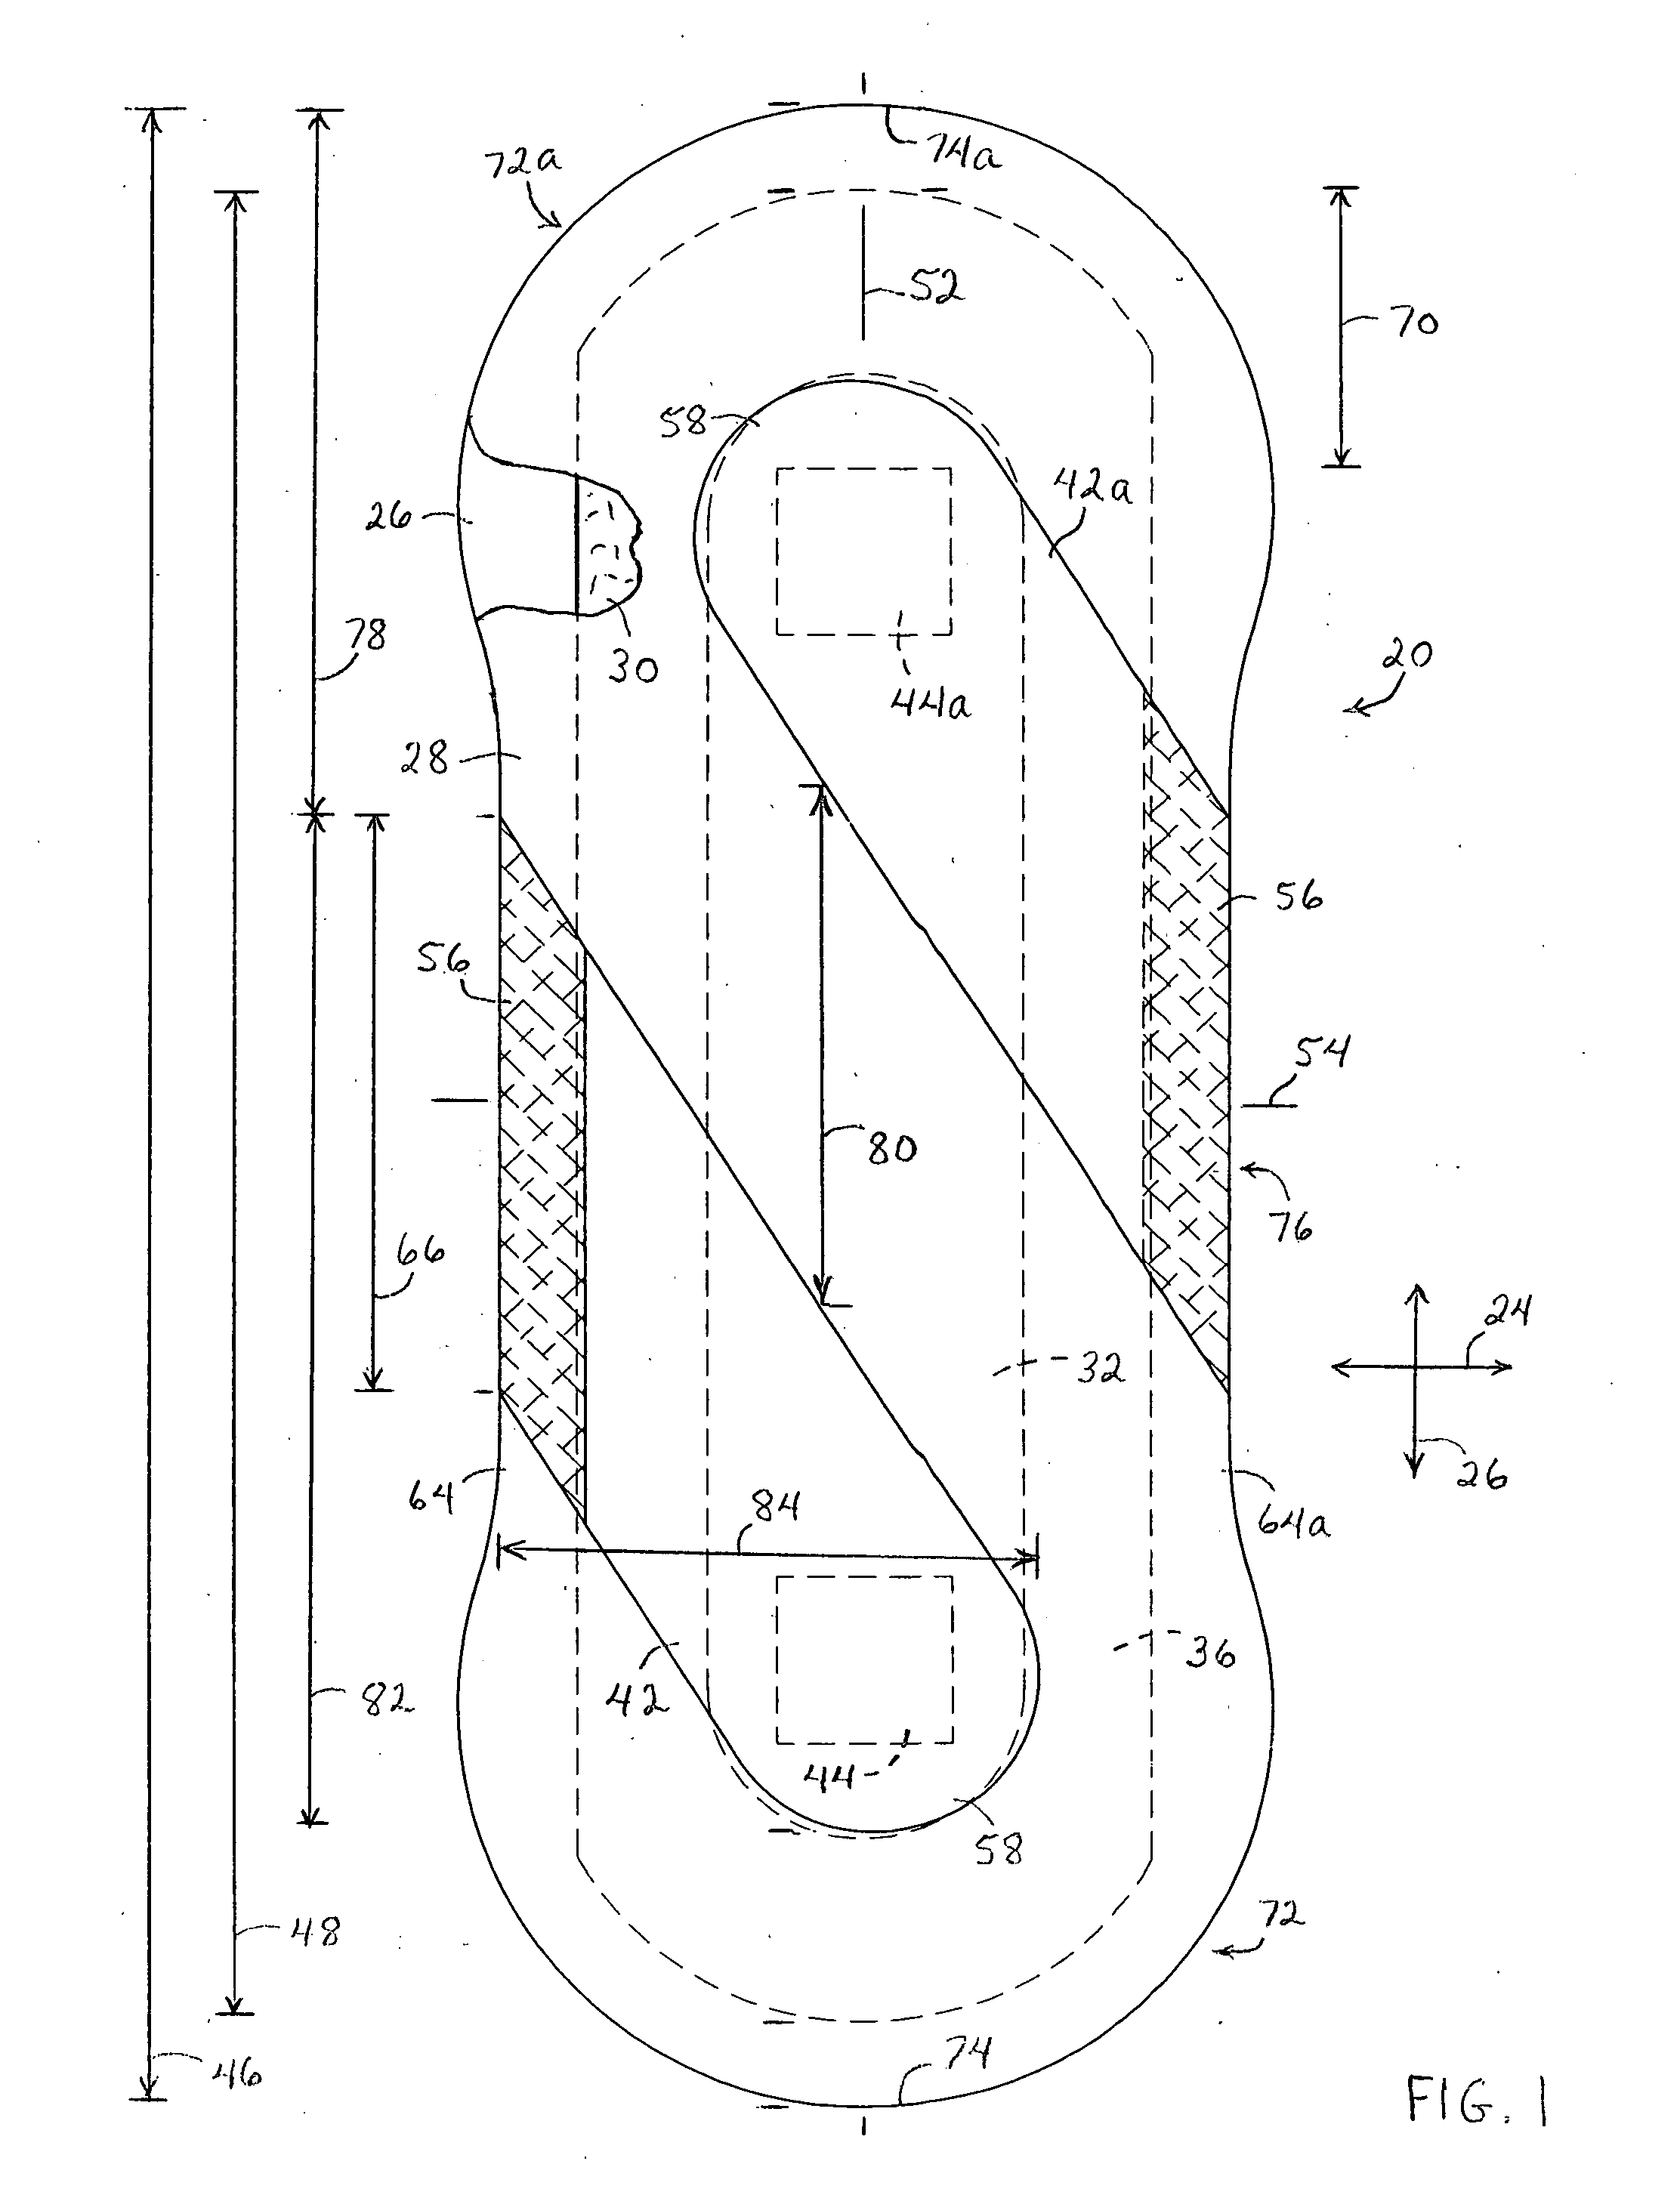 Absorbent article having wings with non-bunching/twisting security